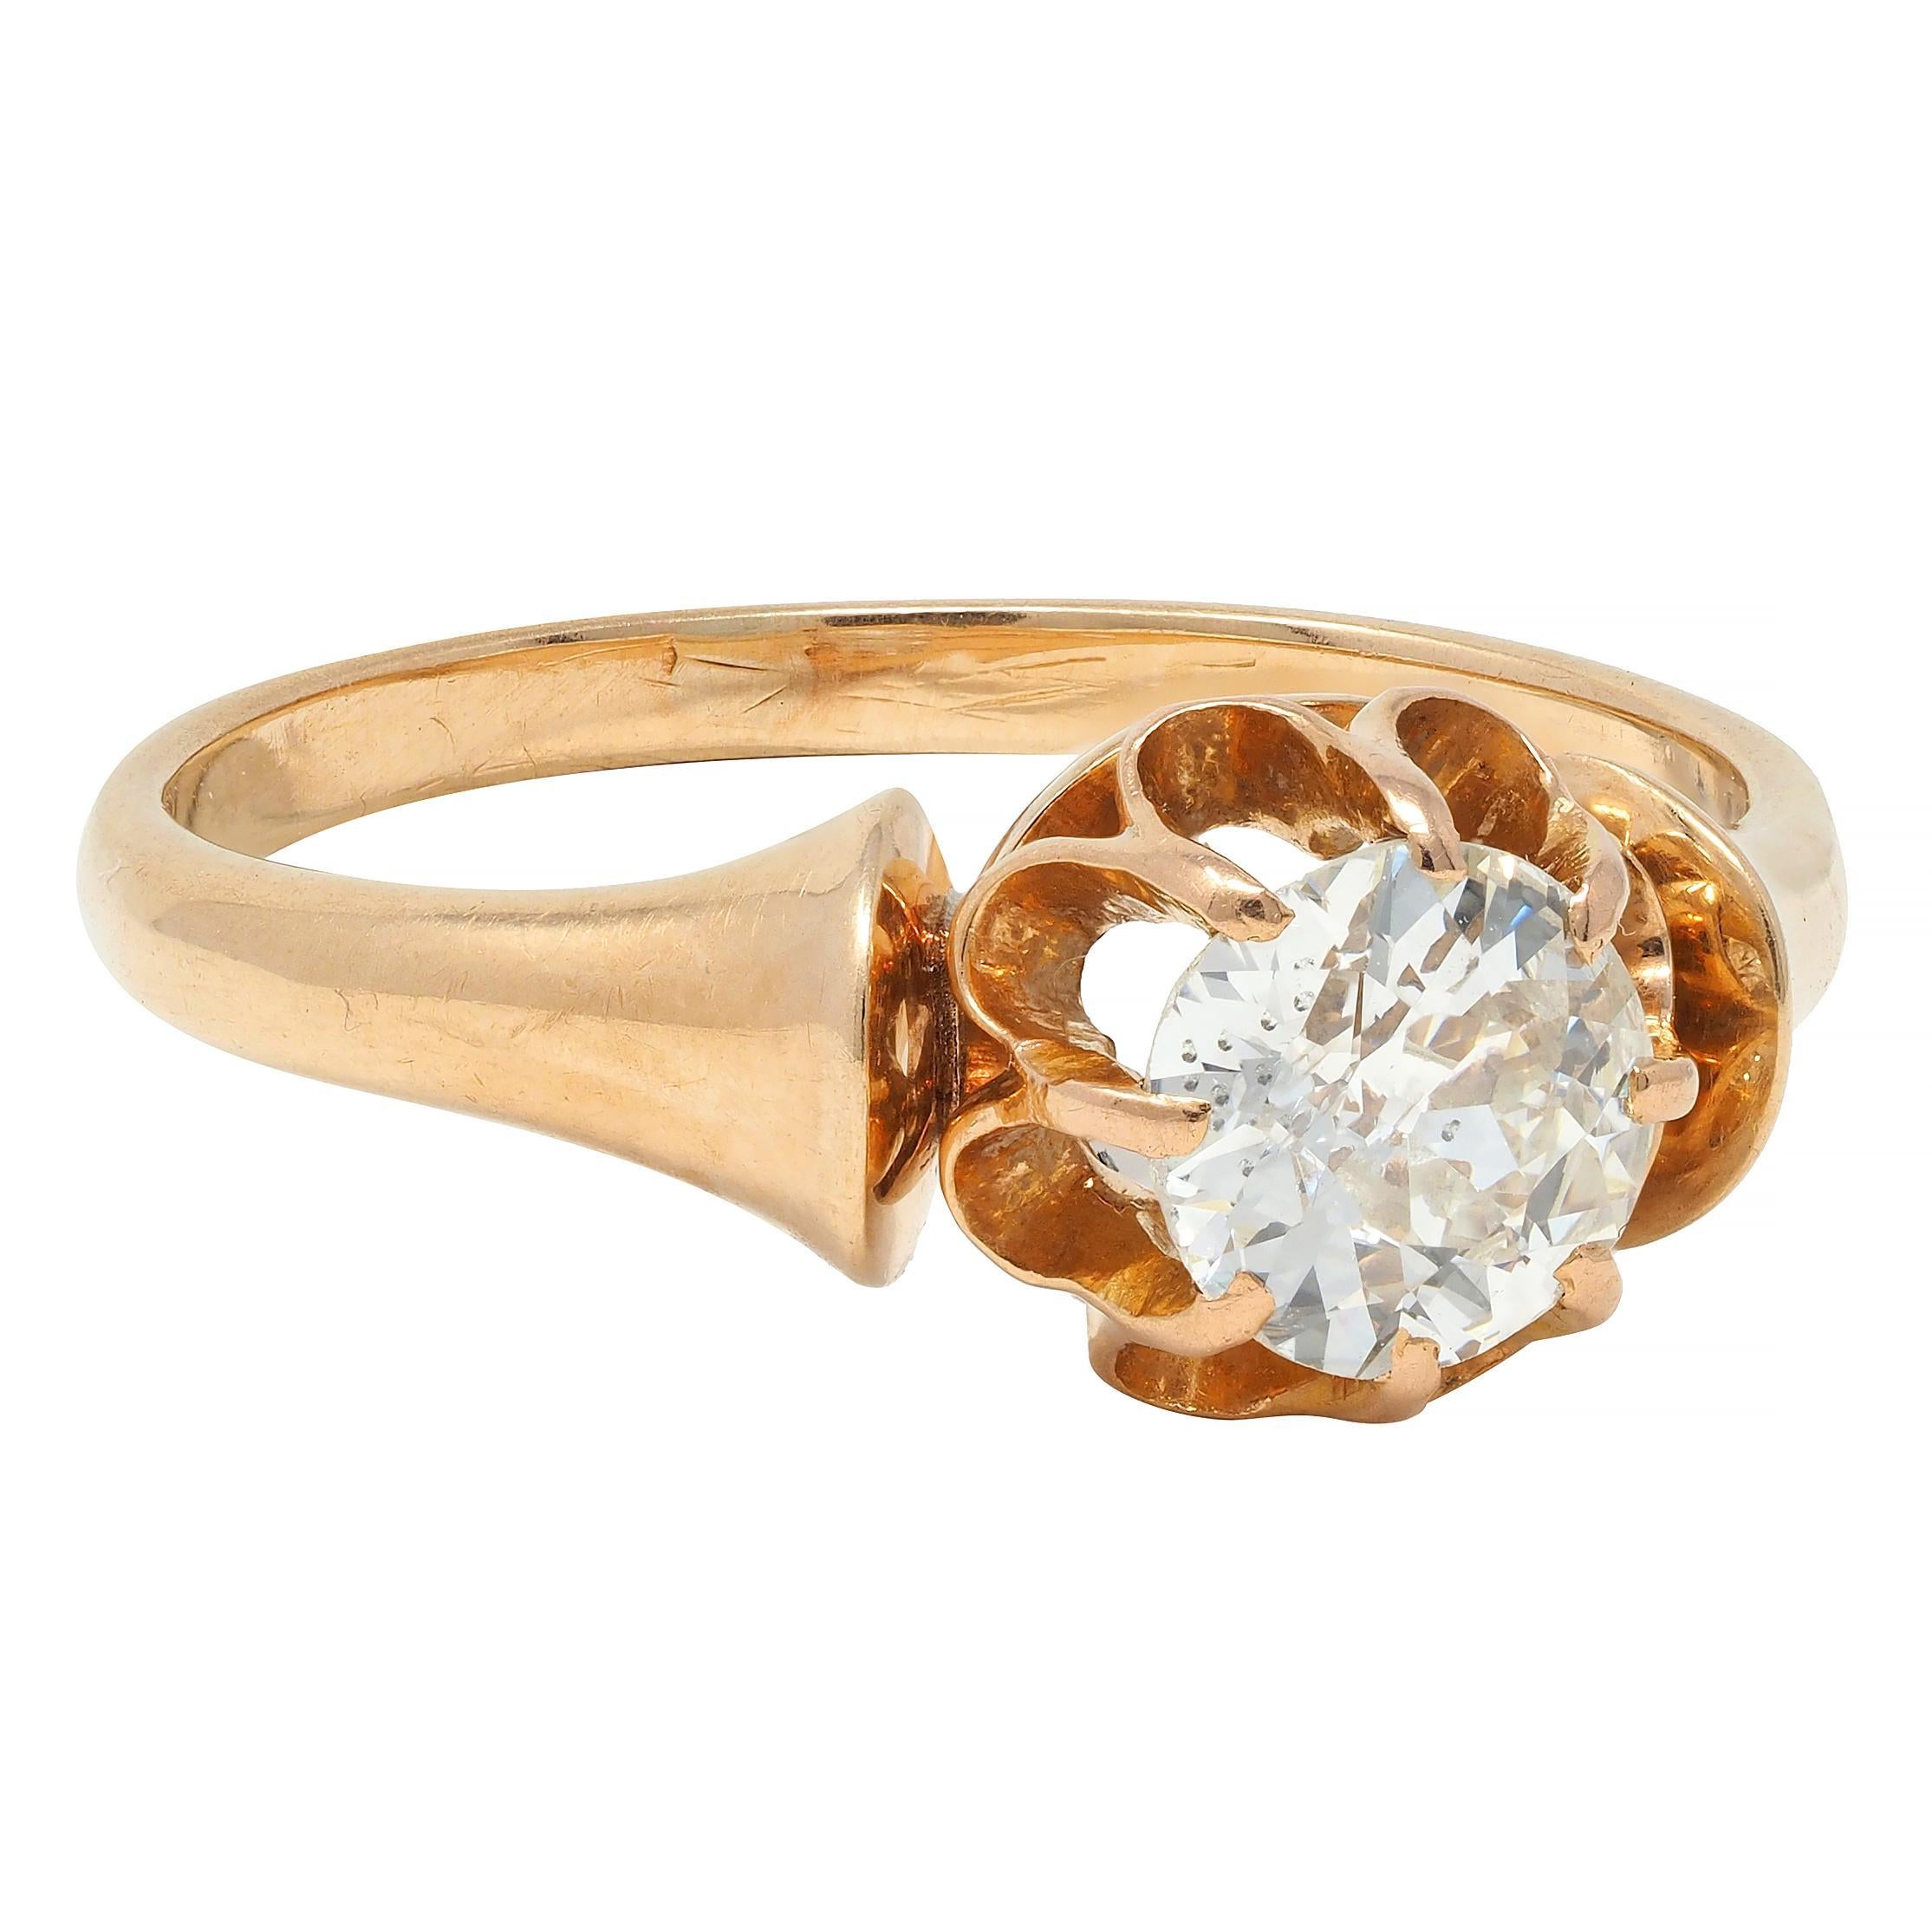 Centering an old European cut diamond weighing approximately 0.55 carat - K color with SI2 clarity
Set with belcher style prongs in a buttercup motif setting 
Flanked by flared arching shoulders
Tested as 14 karat gold
Circa: 1860s
Ring size: 6 1/2